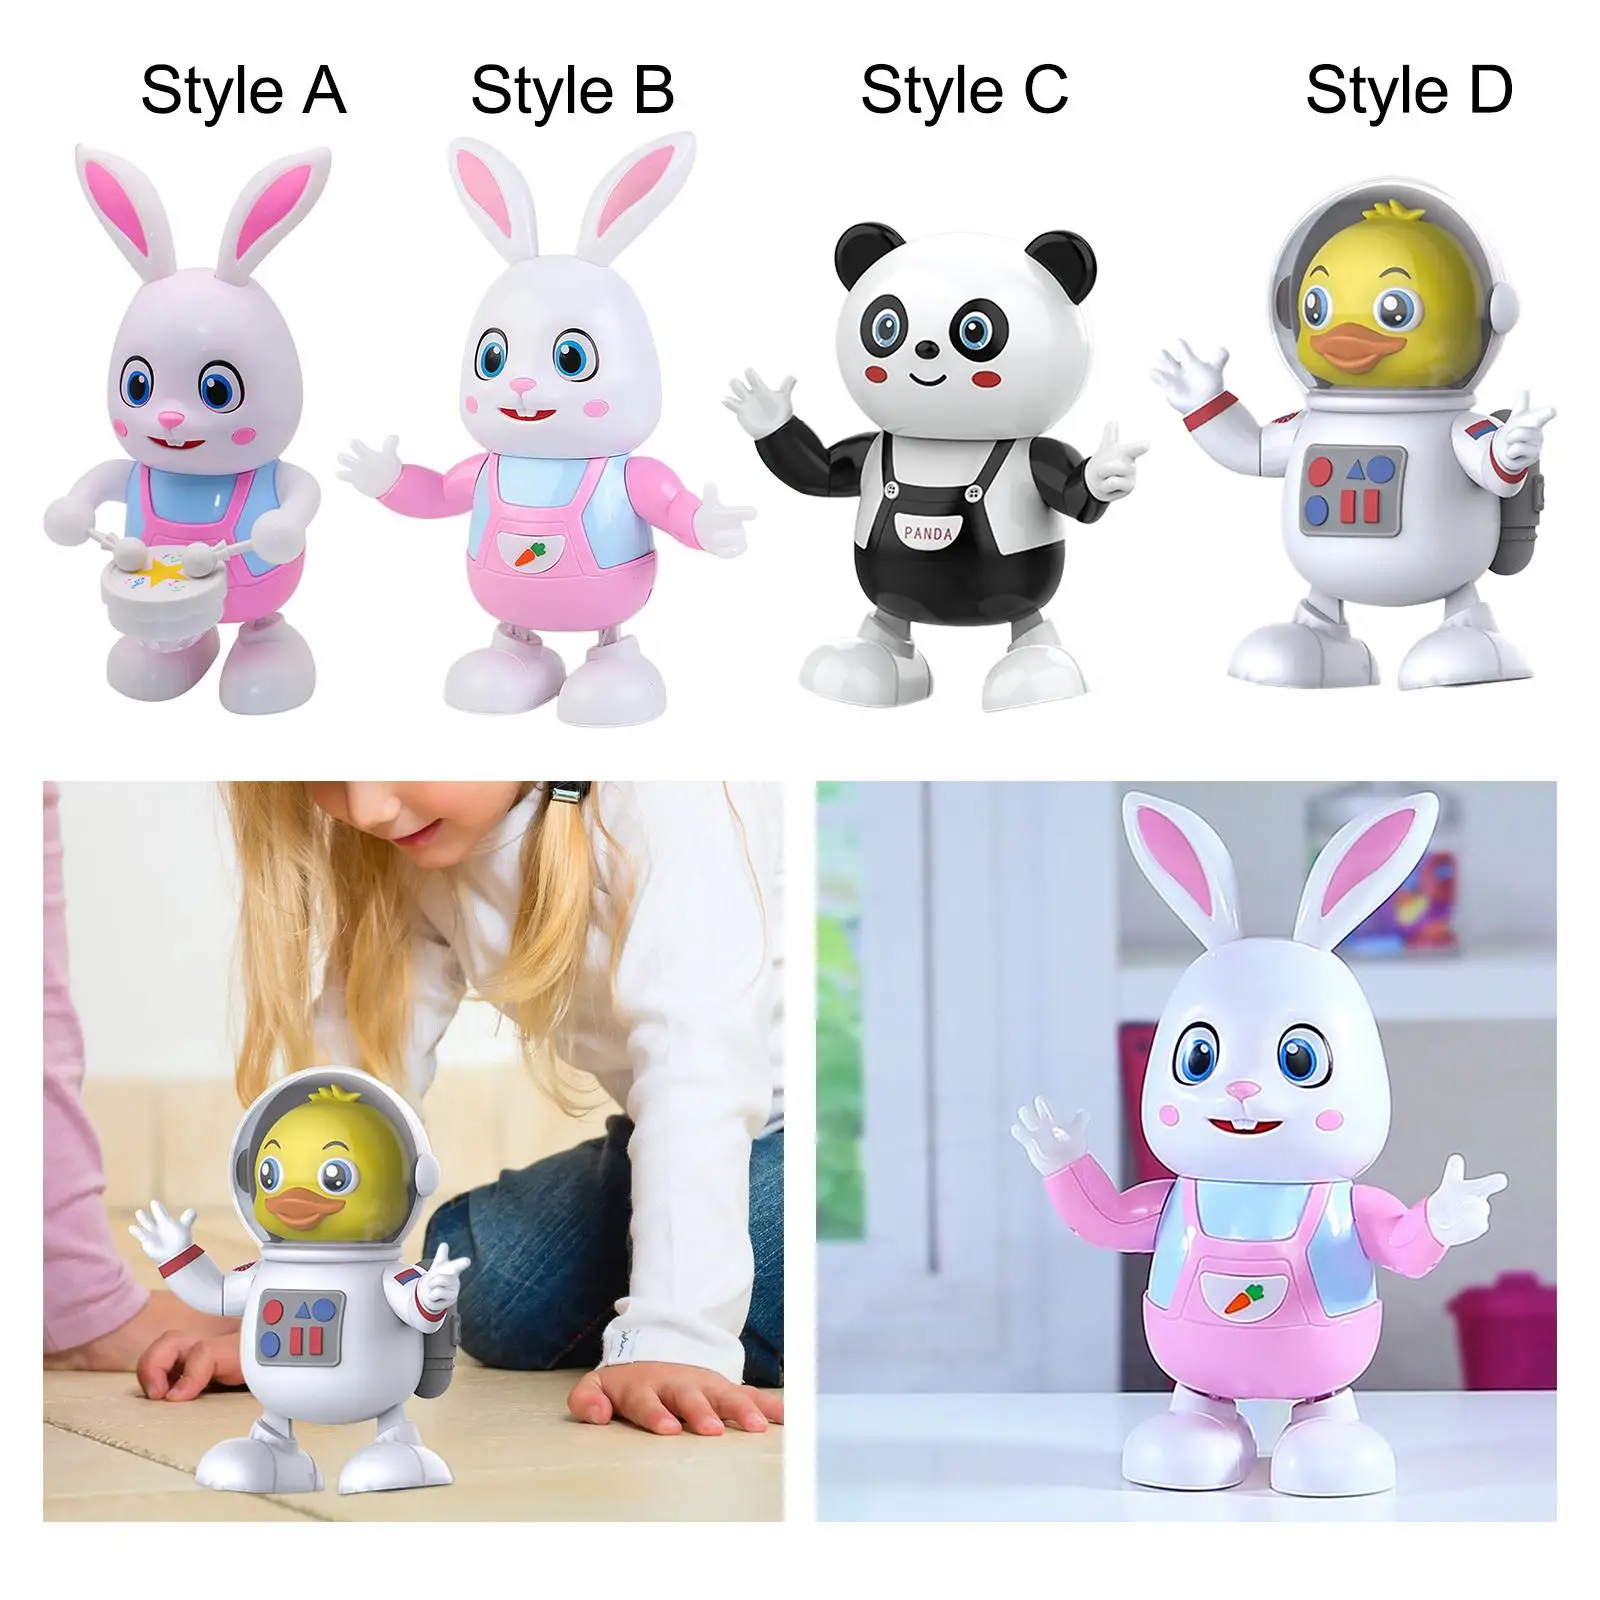 Dancing Toy Easy to Use Learning Festivals Birthday Parties Gifts Educational Toy for Girls Babies 3+ Year Old Children Kids